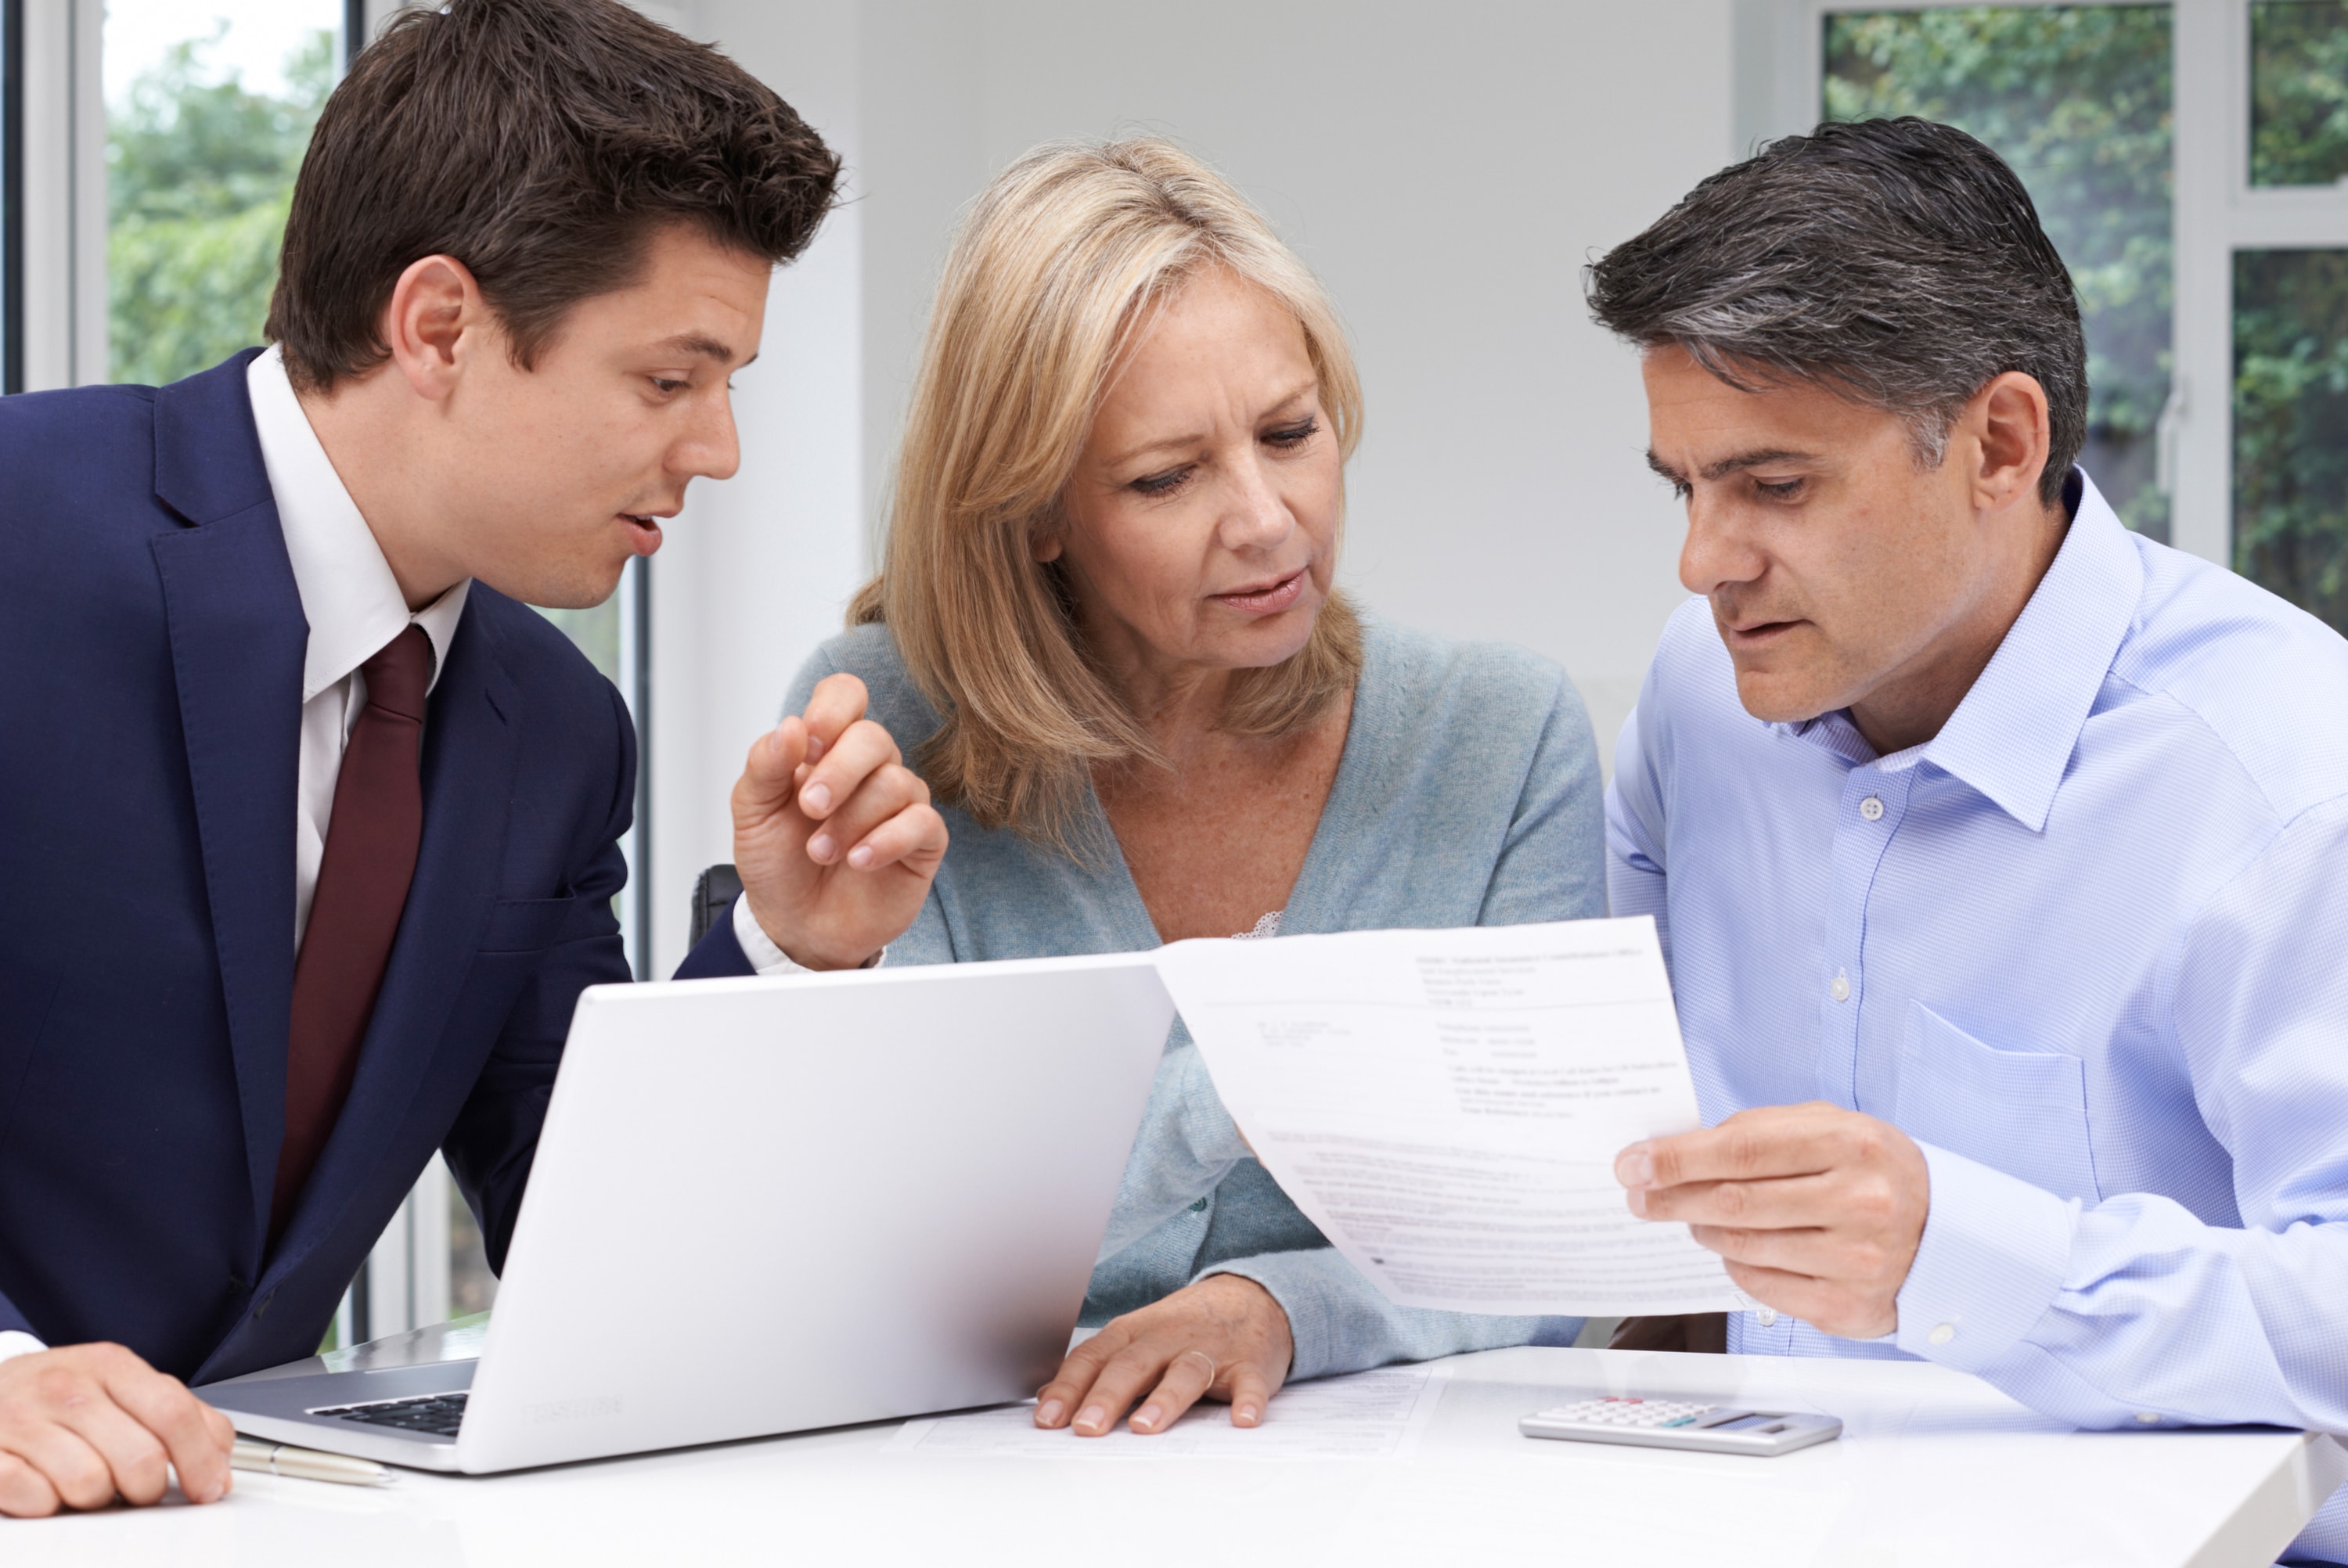 How to Find & Choose a Financial Advisor - 7 Things to Consider